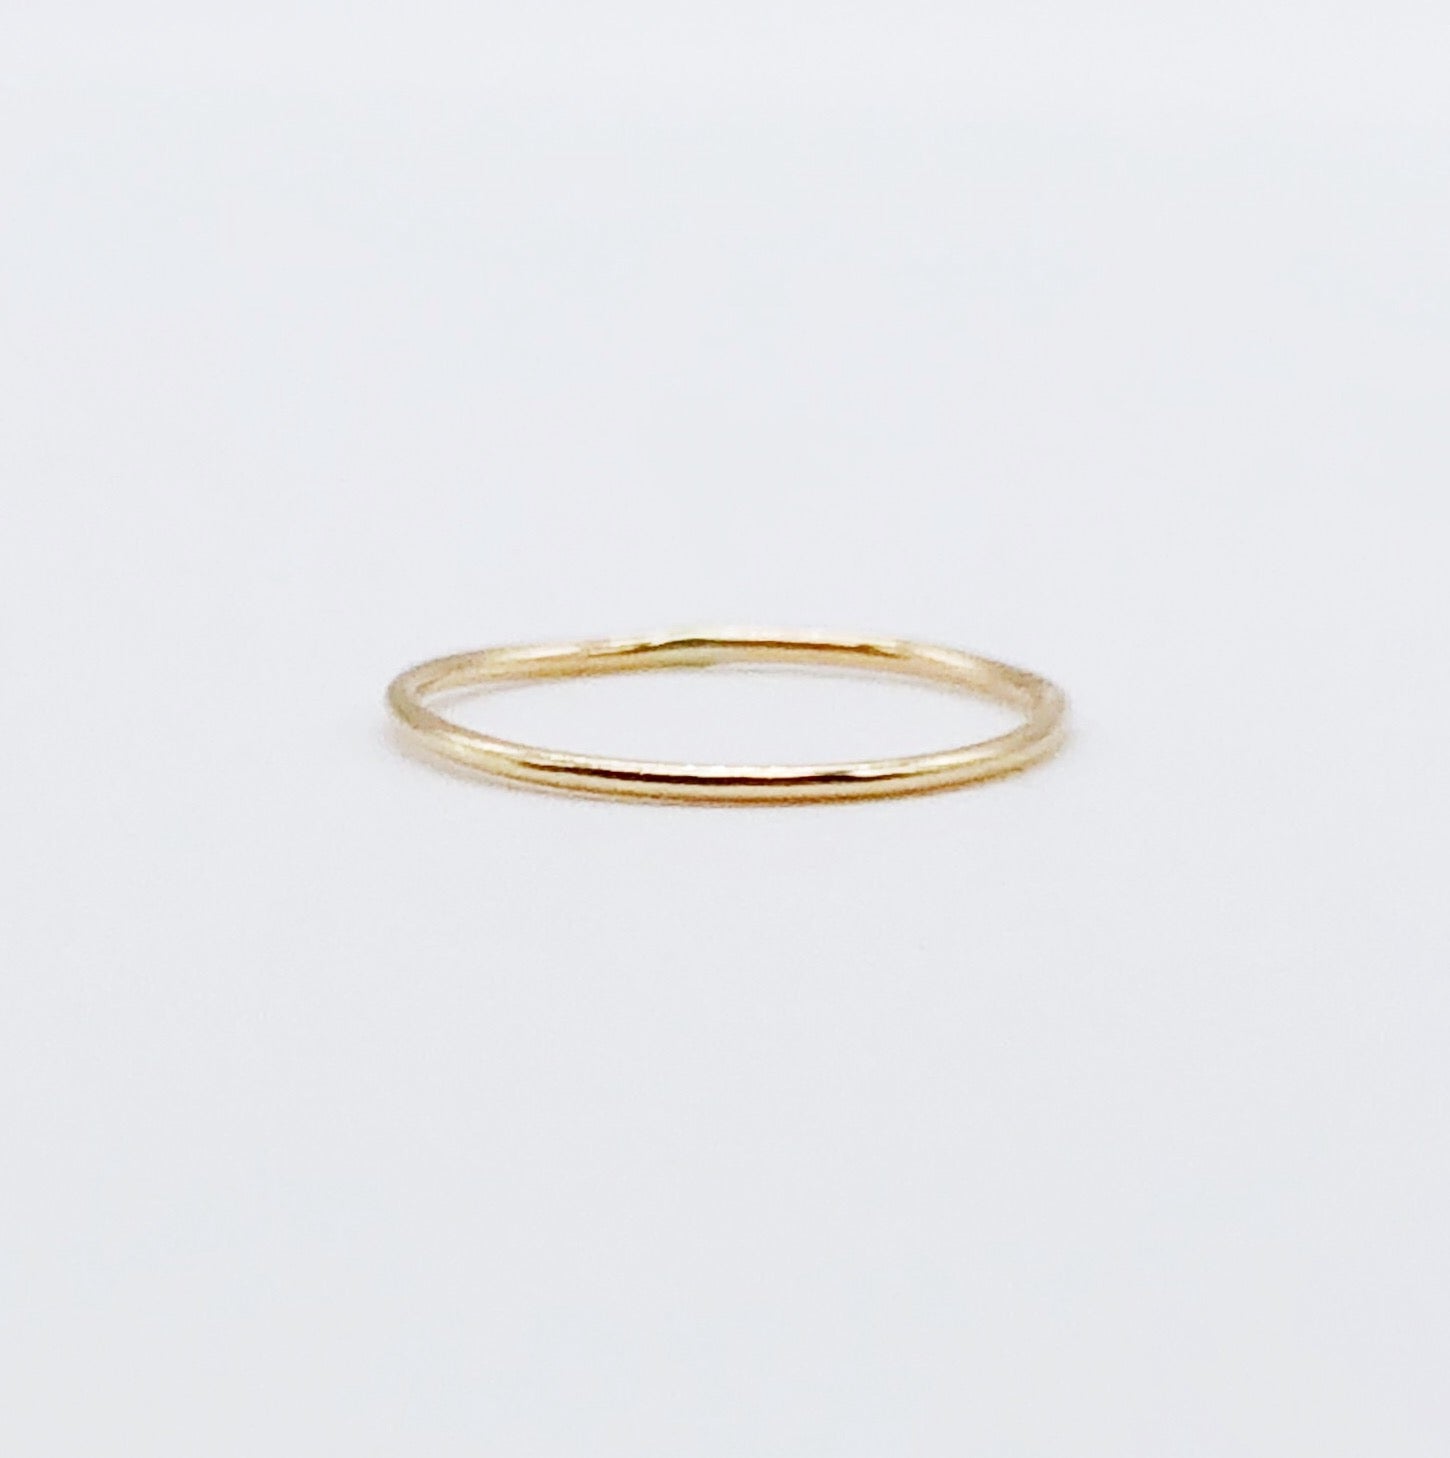 Super Thin Ring | 14kt Gold Filled 1mm Stacking Ring